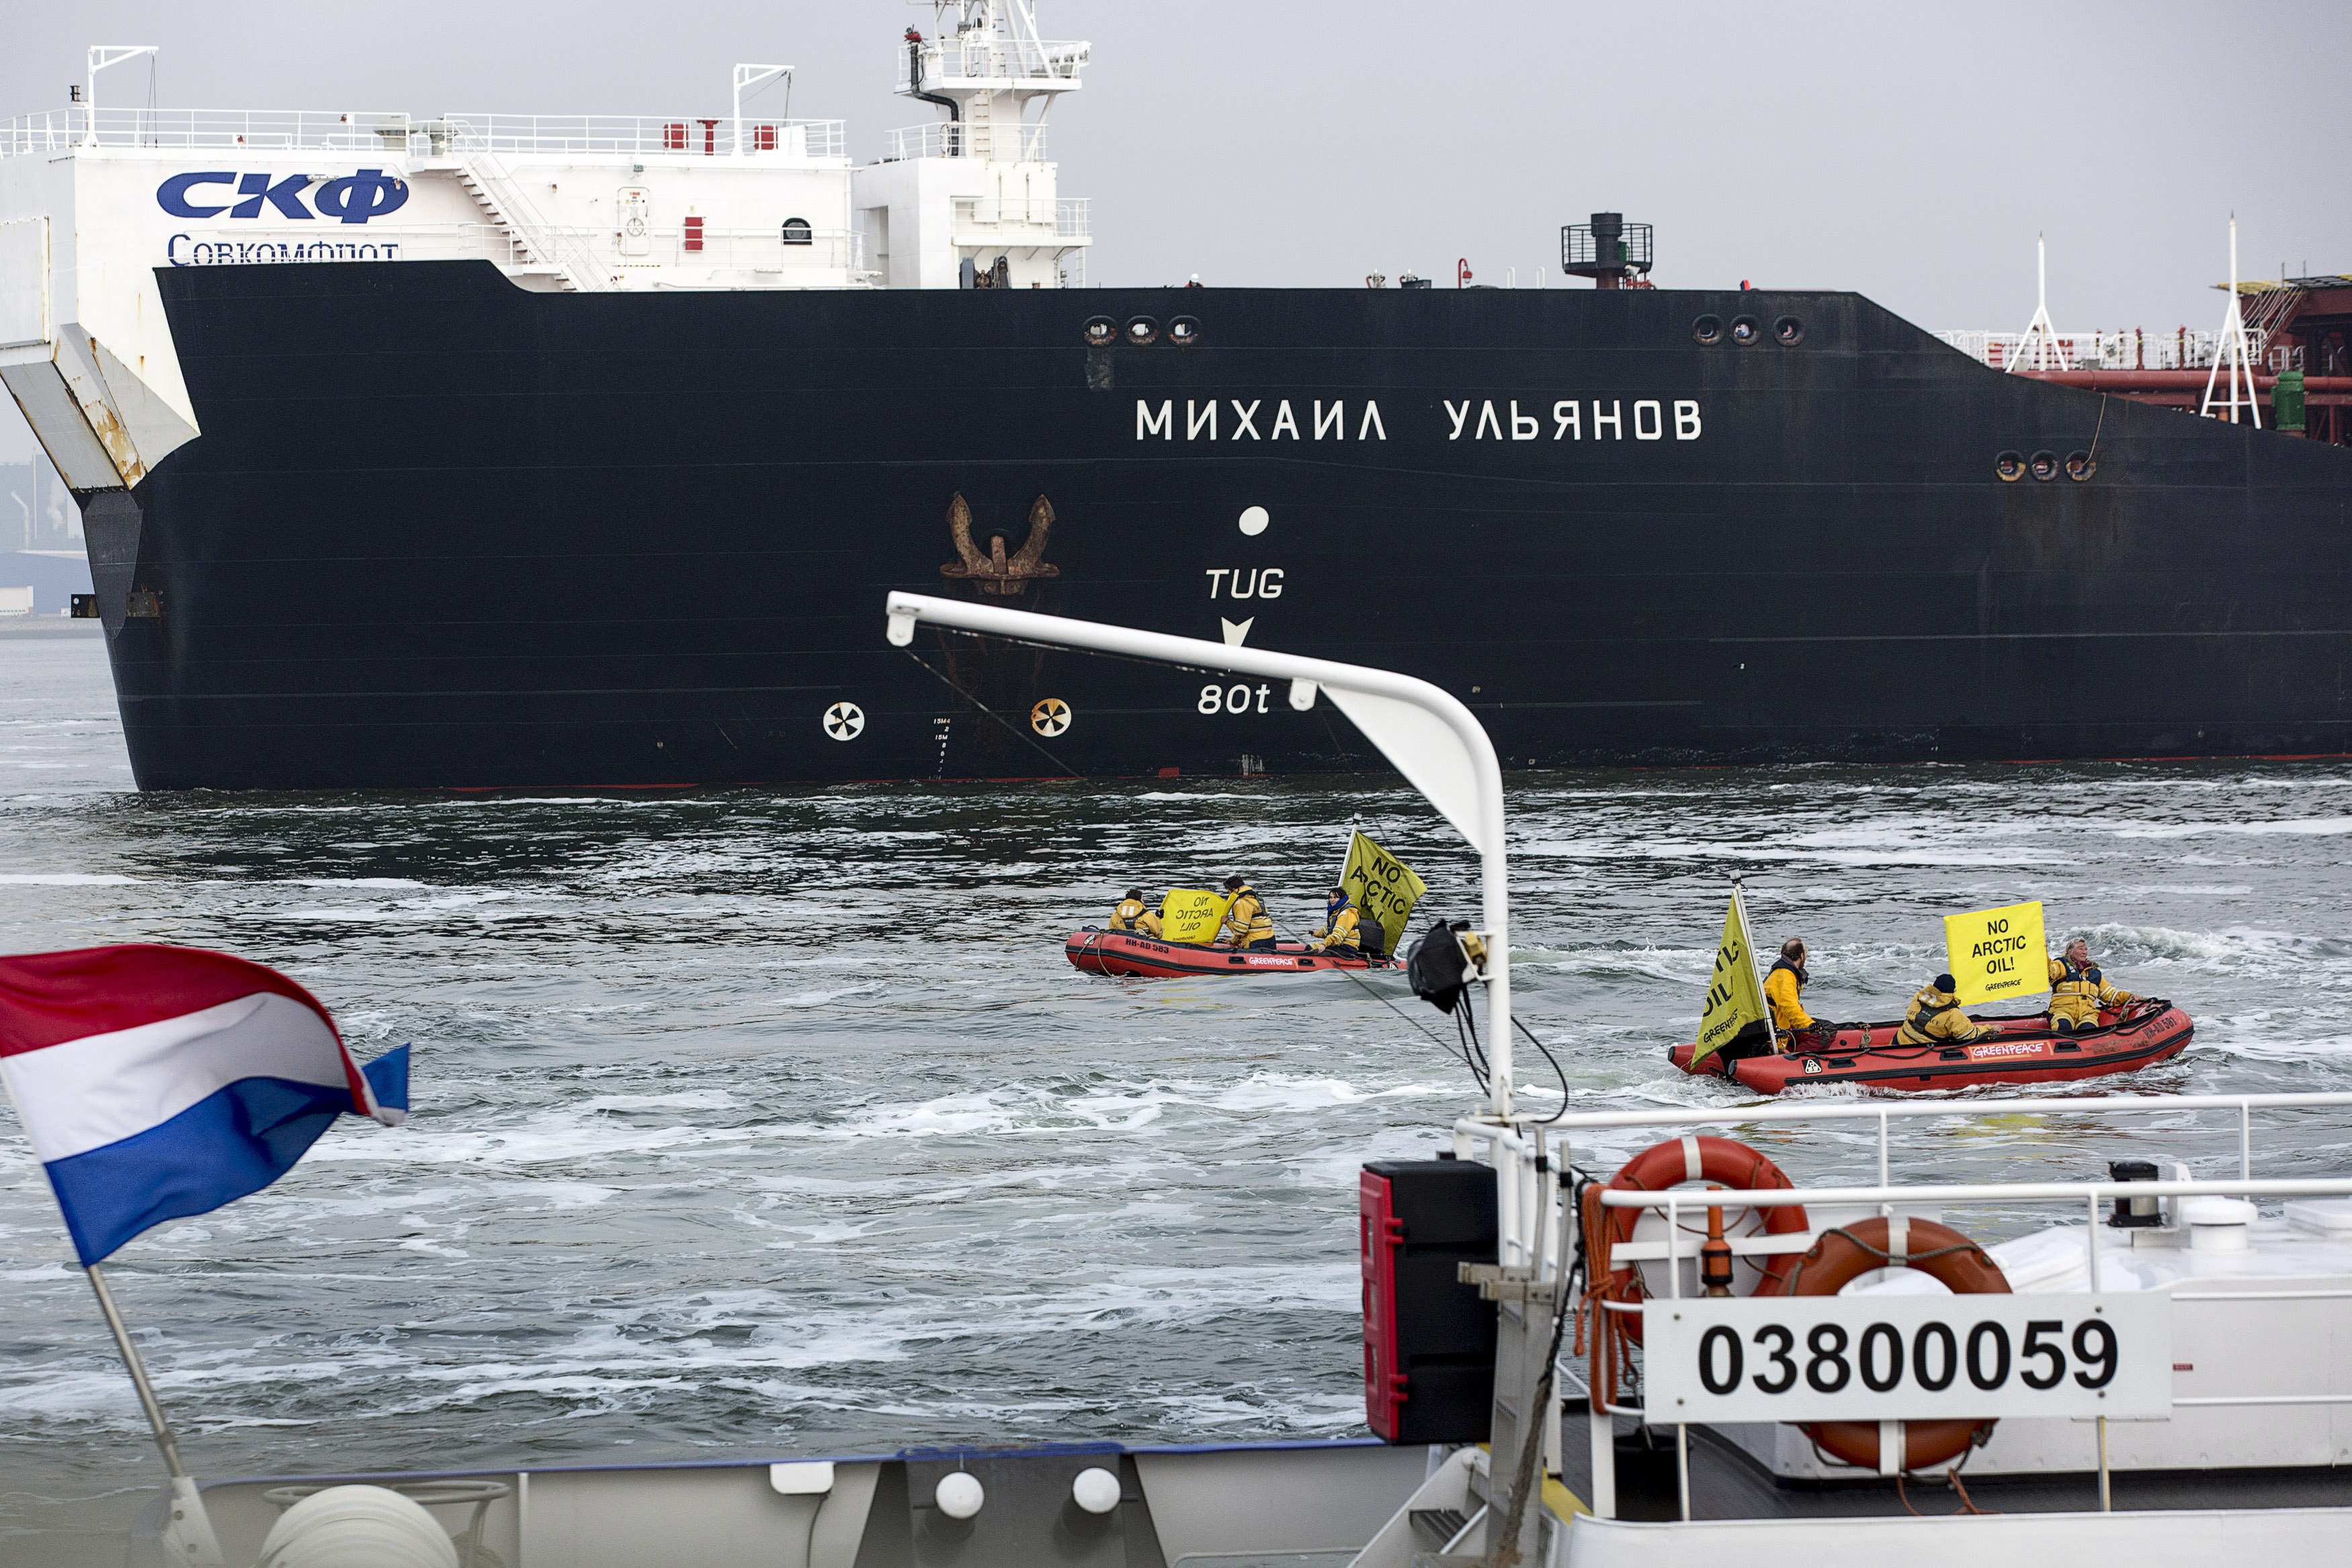 Members of Greenpeace sail past the Russian oil tanker Mikhail Ulyanov in the harbour of Rotterdam yesterday. Photo: Reuters